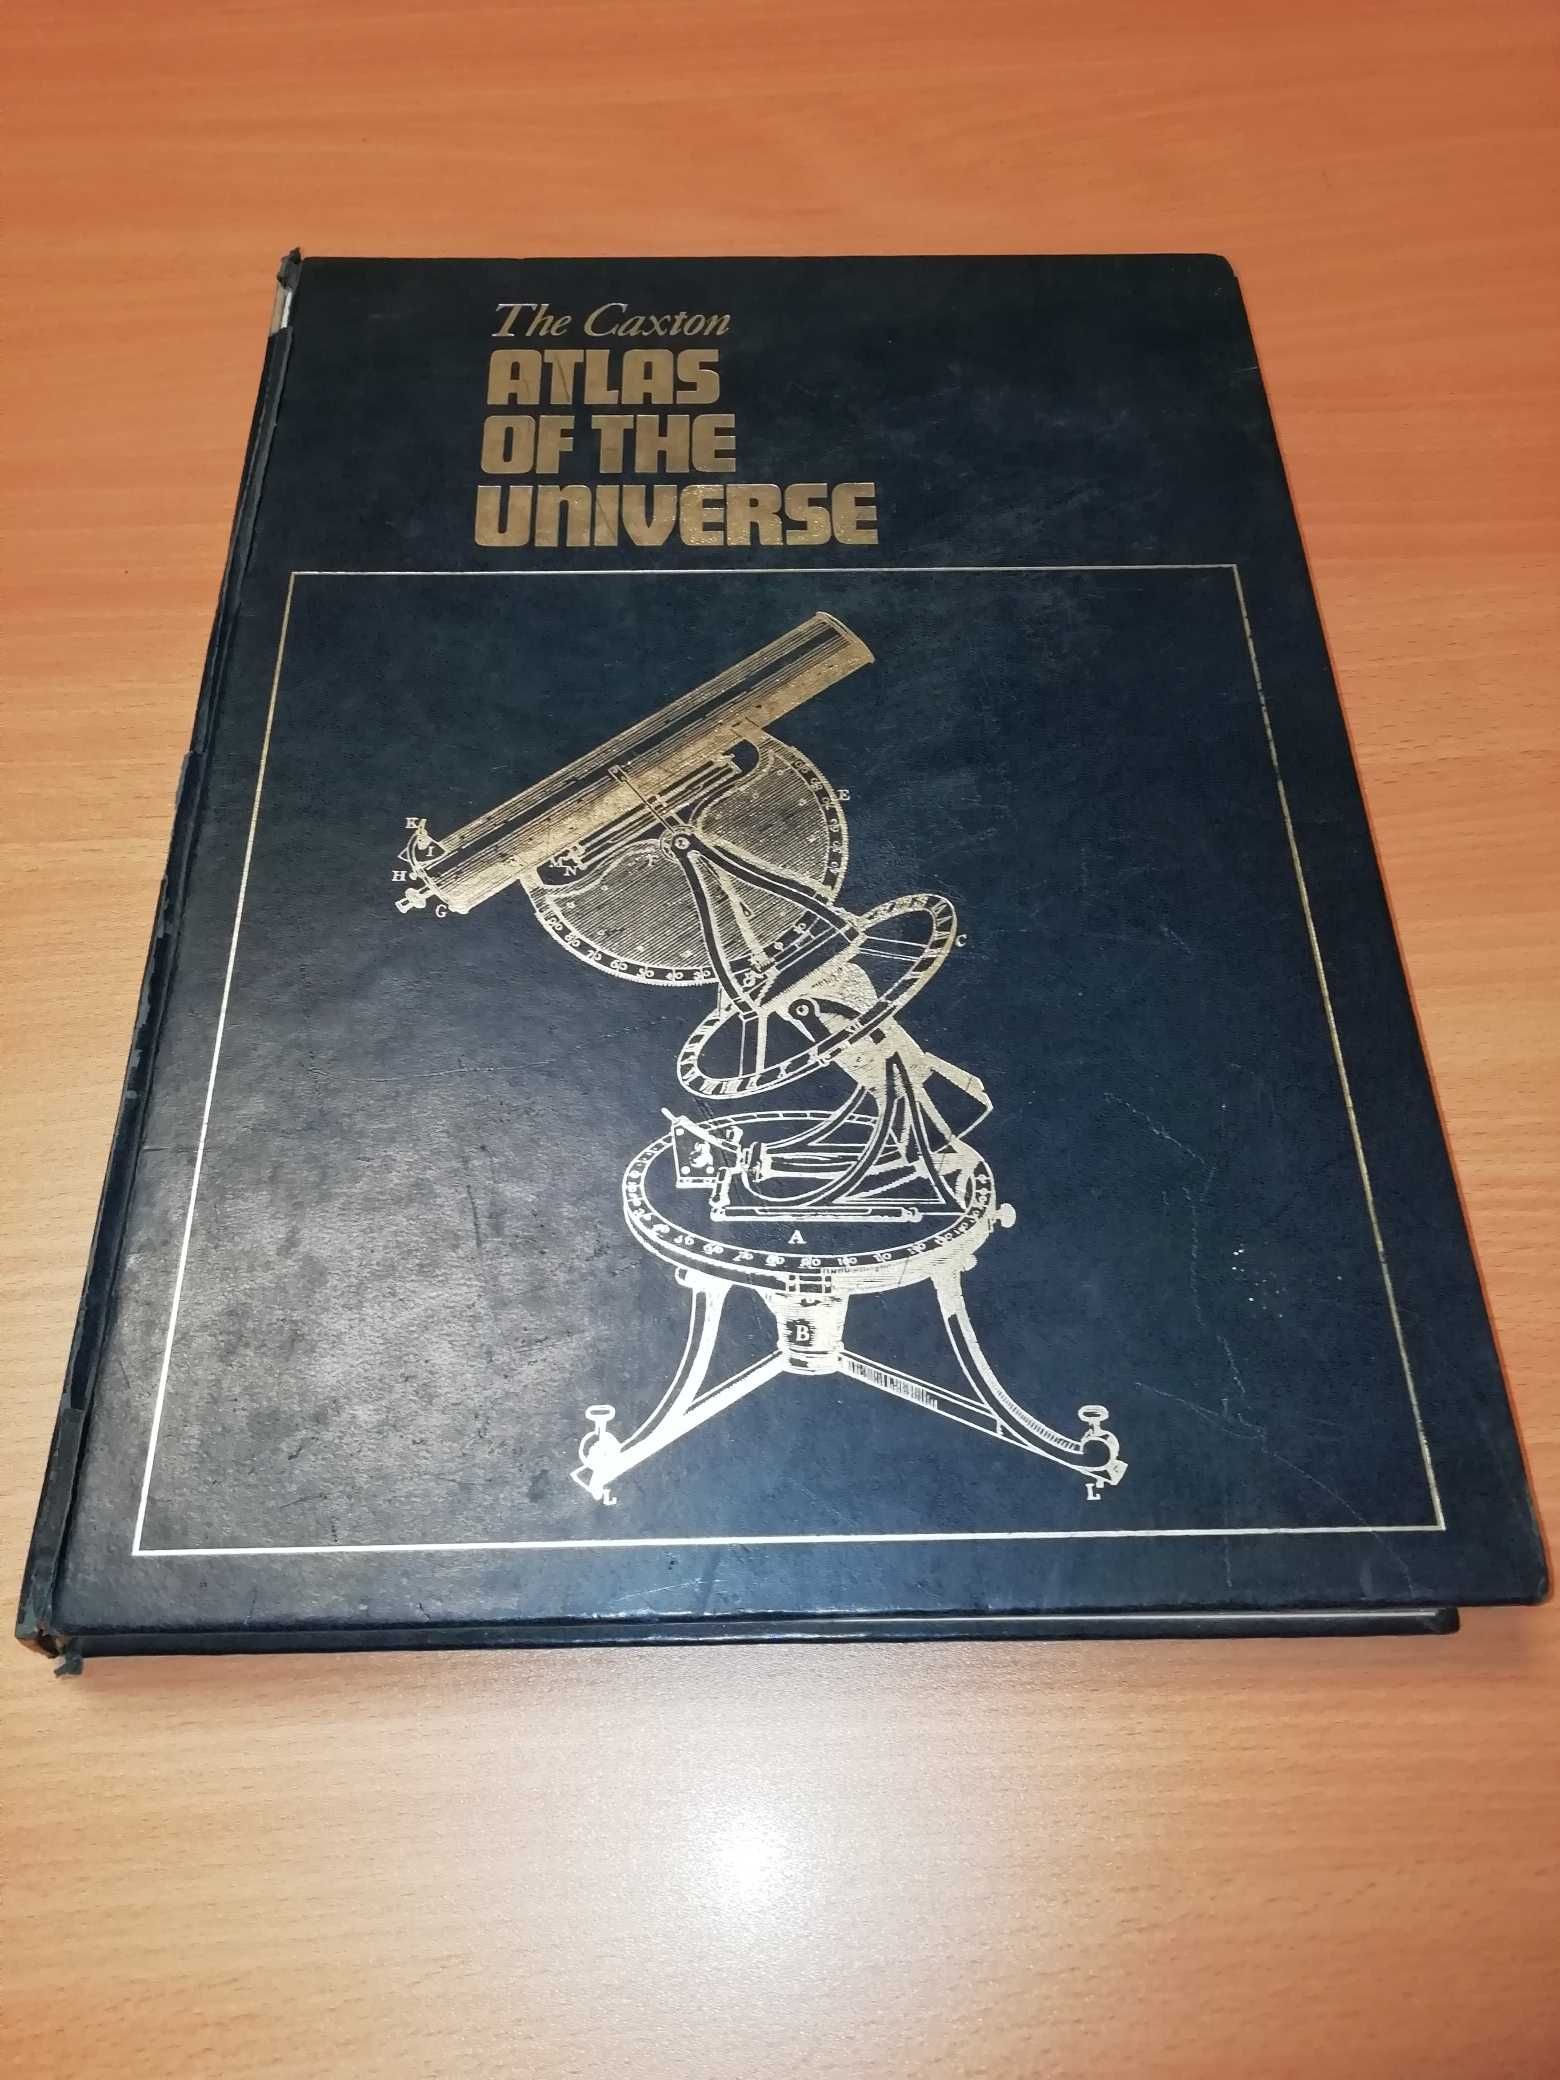 Atlas of the universe by Patrick More